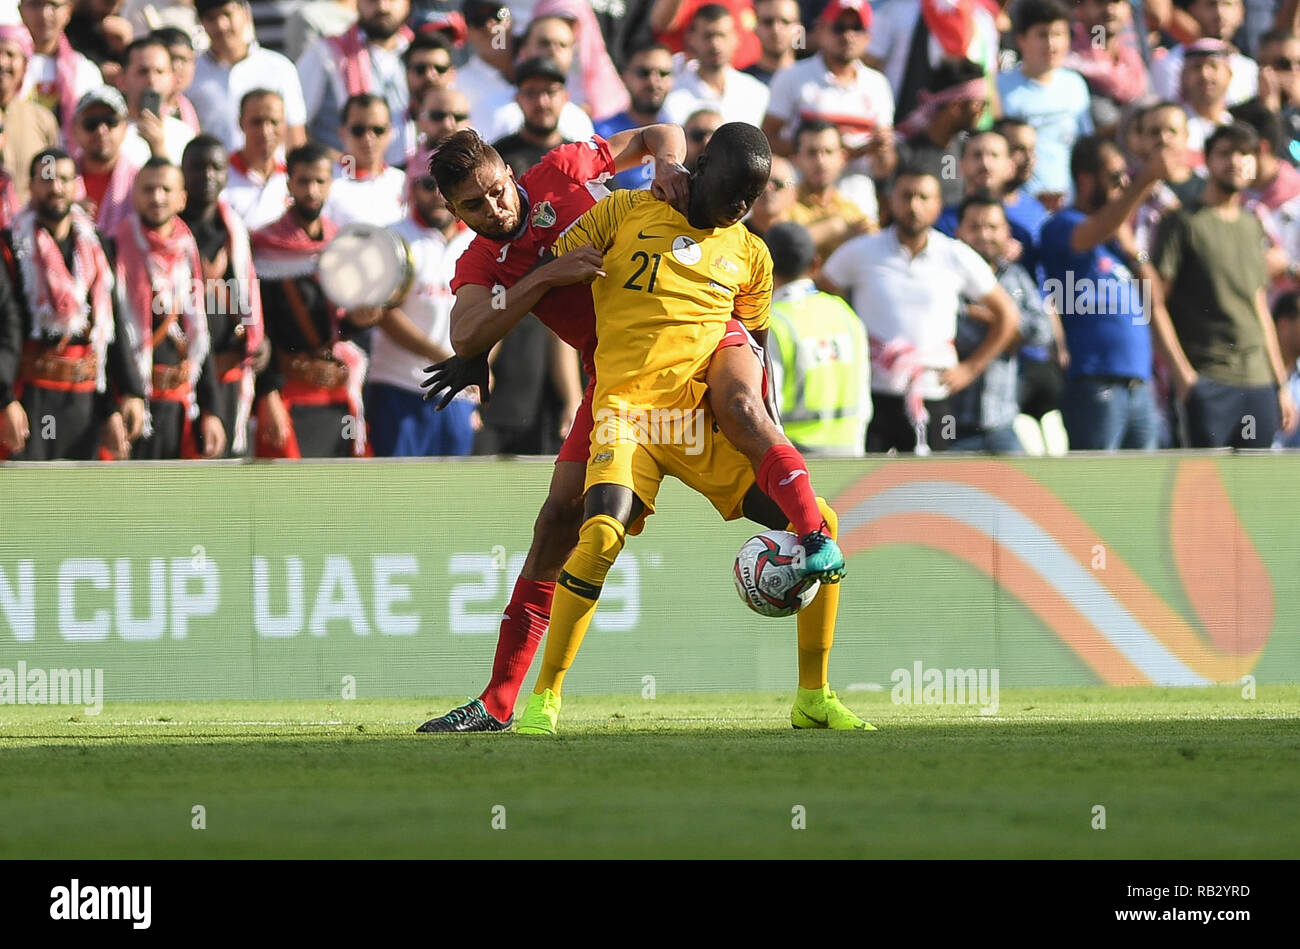 Al Ain, UAE. 6th Jan, 2019. Awer Mabil (F) of Australia competes during the  group B match between Jordan and Australia of the AFC Asian Cup UAE 2019 in  Al Ain, the